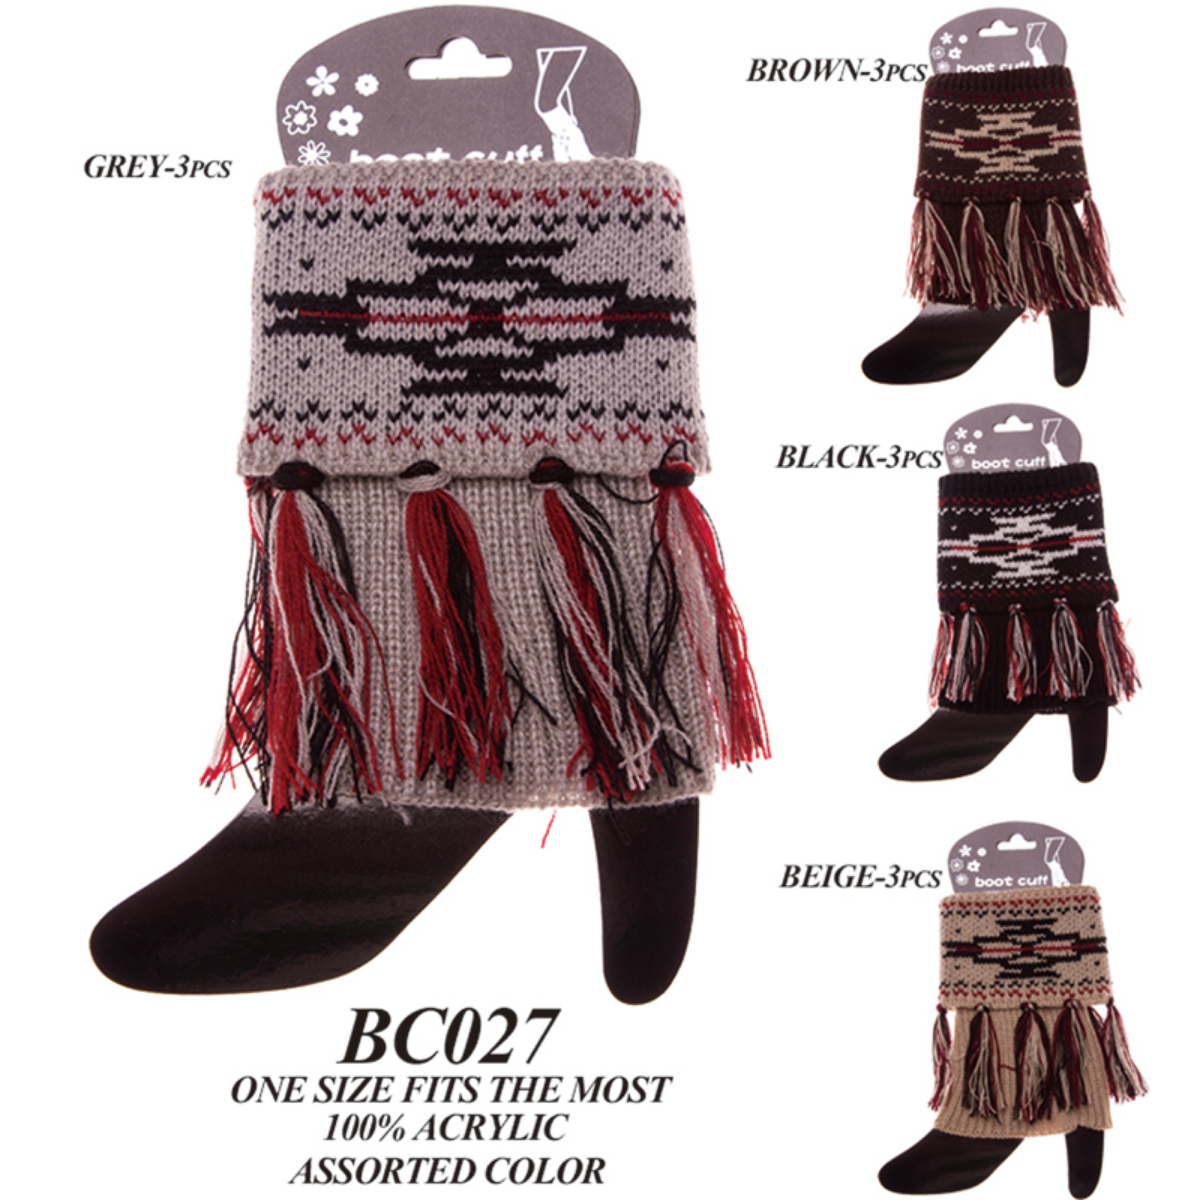 Mixed Print Short Knitted Boot Cuffs W/ Fringe - 12Pc Set